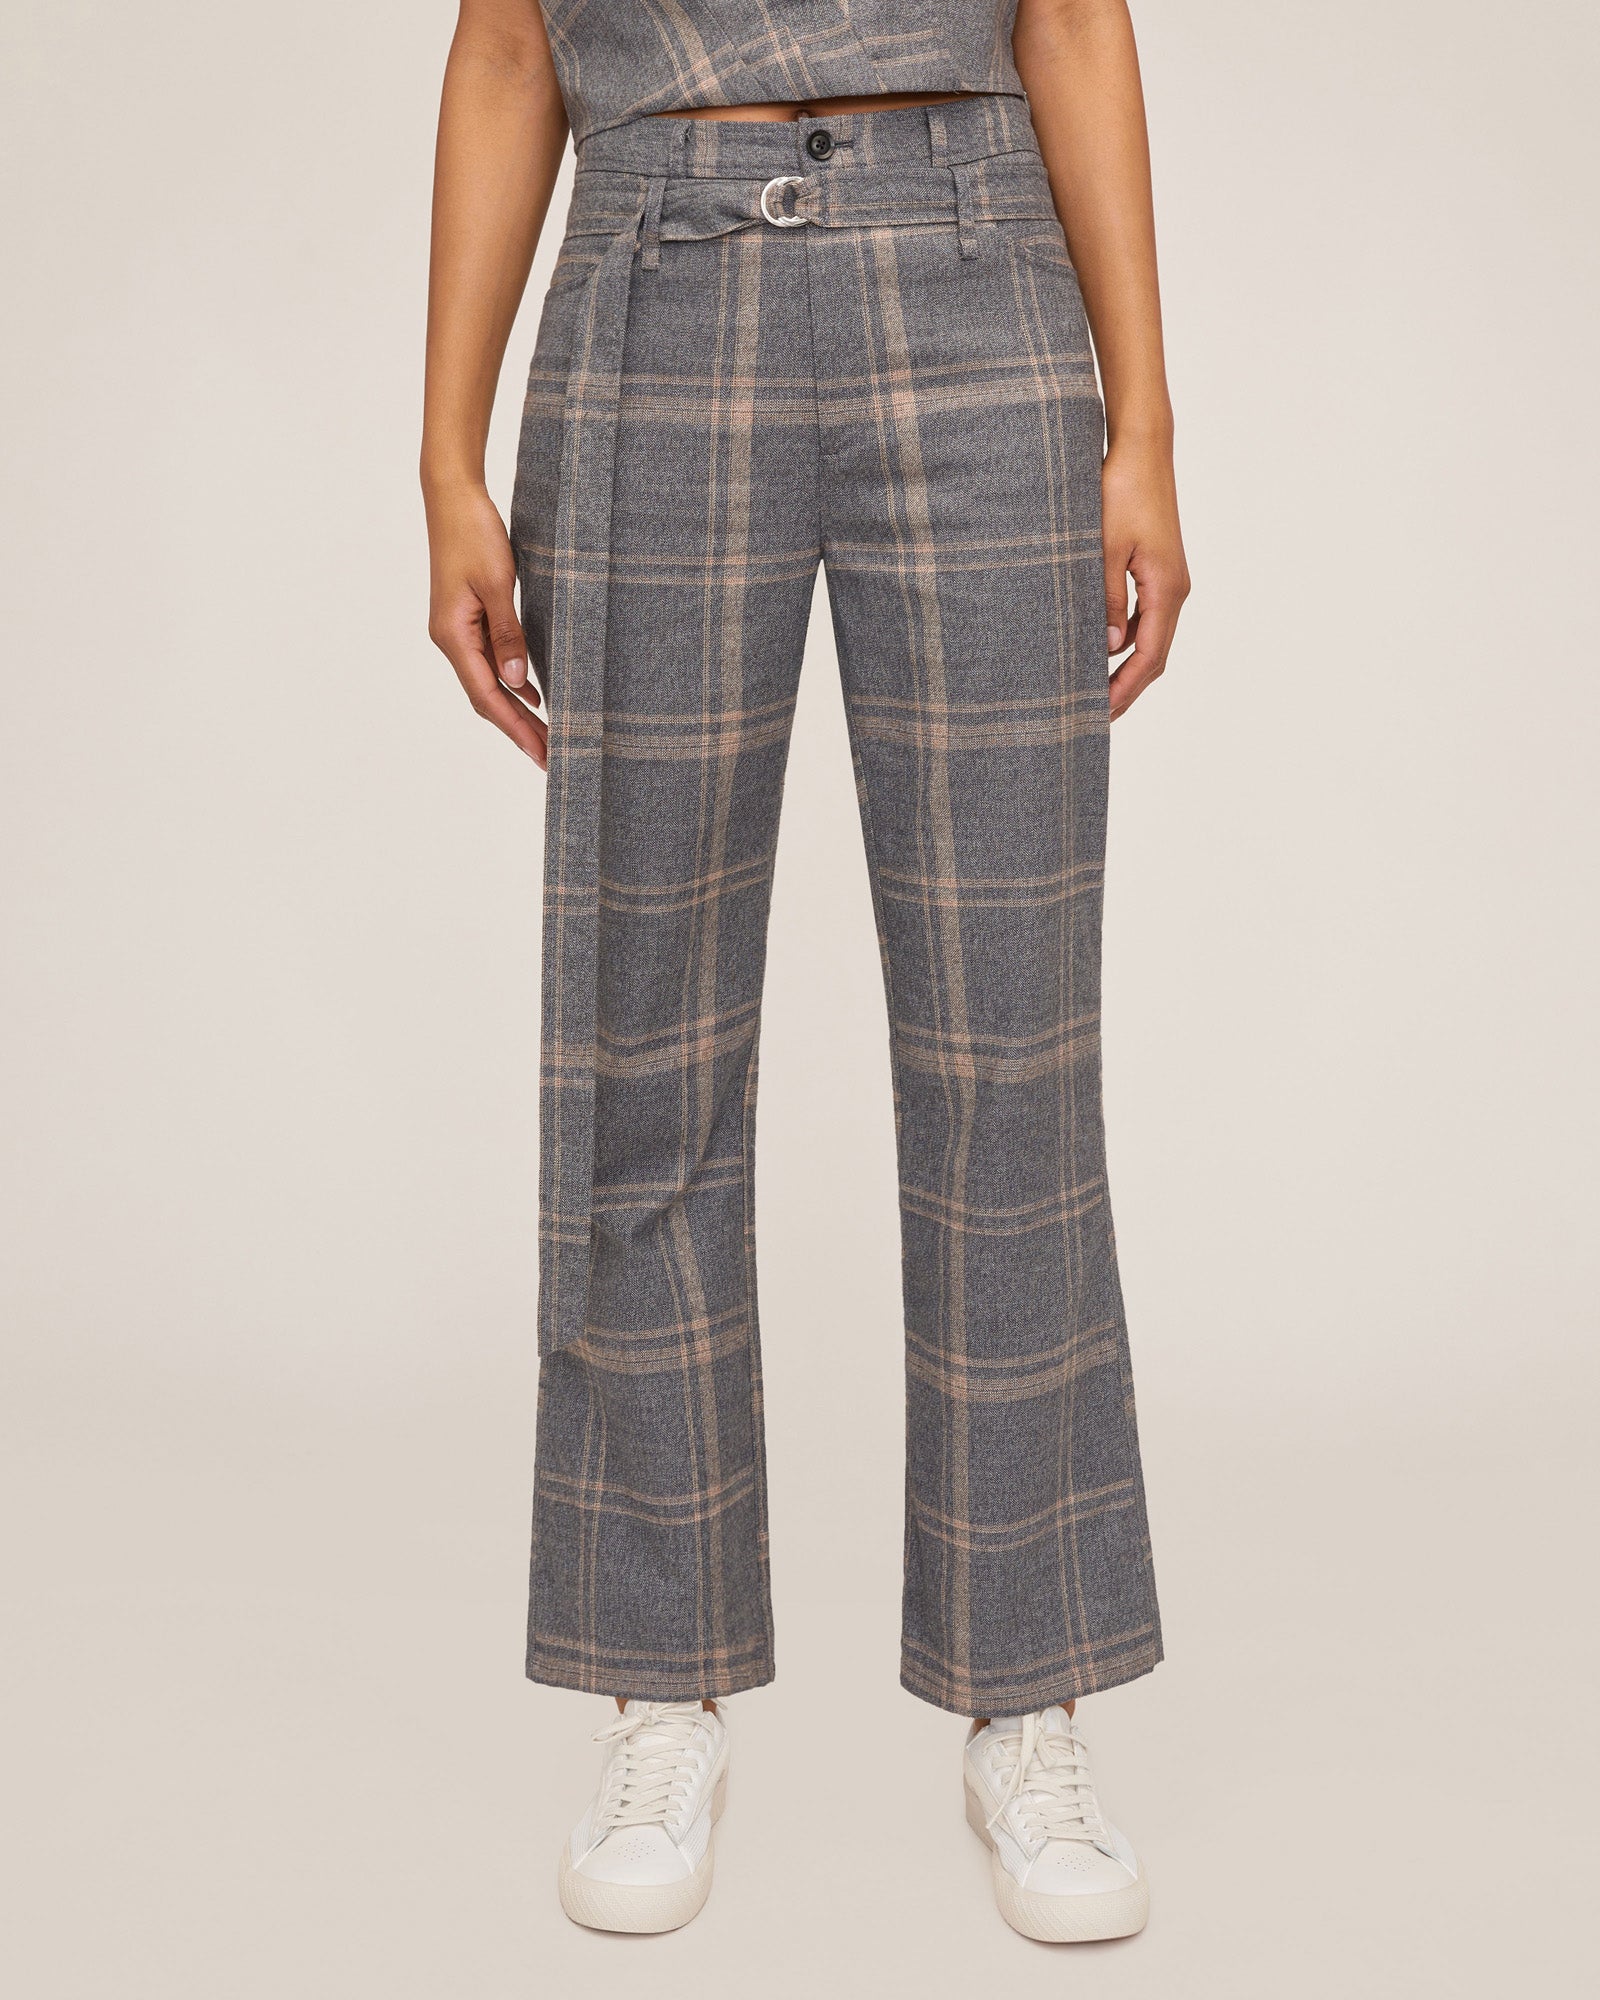 Faux Leather Kick-Flare Trousers by Marissa Webb Collective for $60